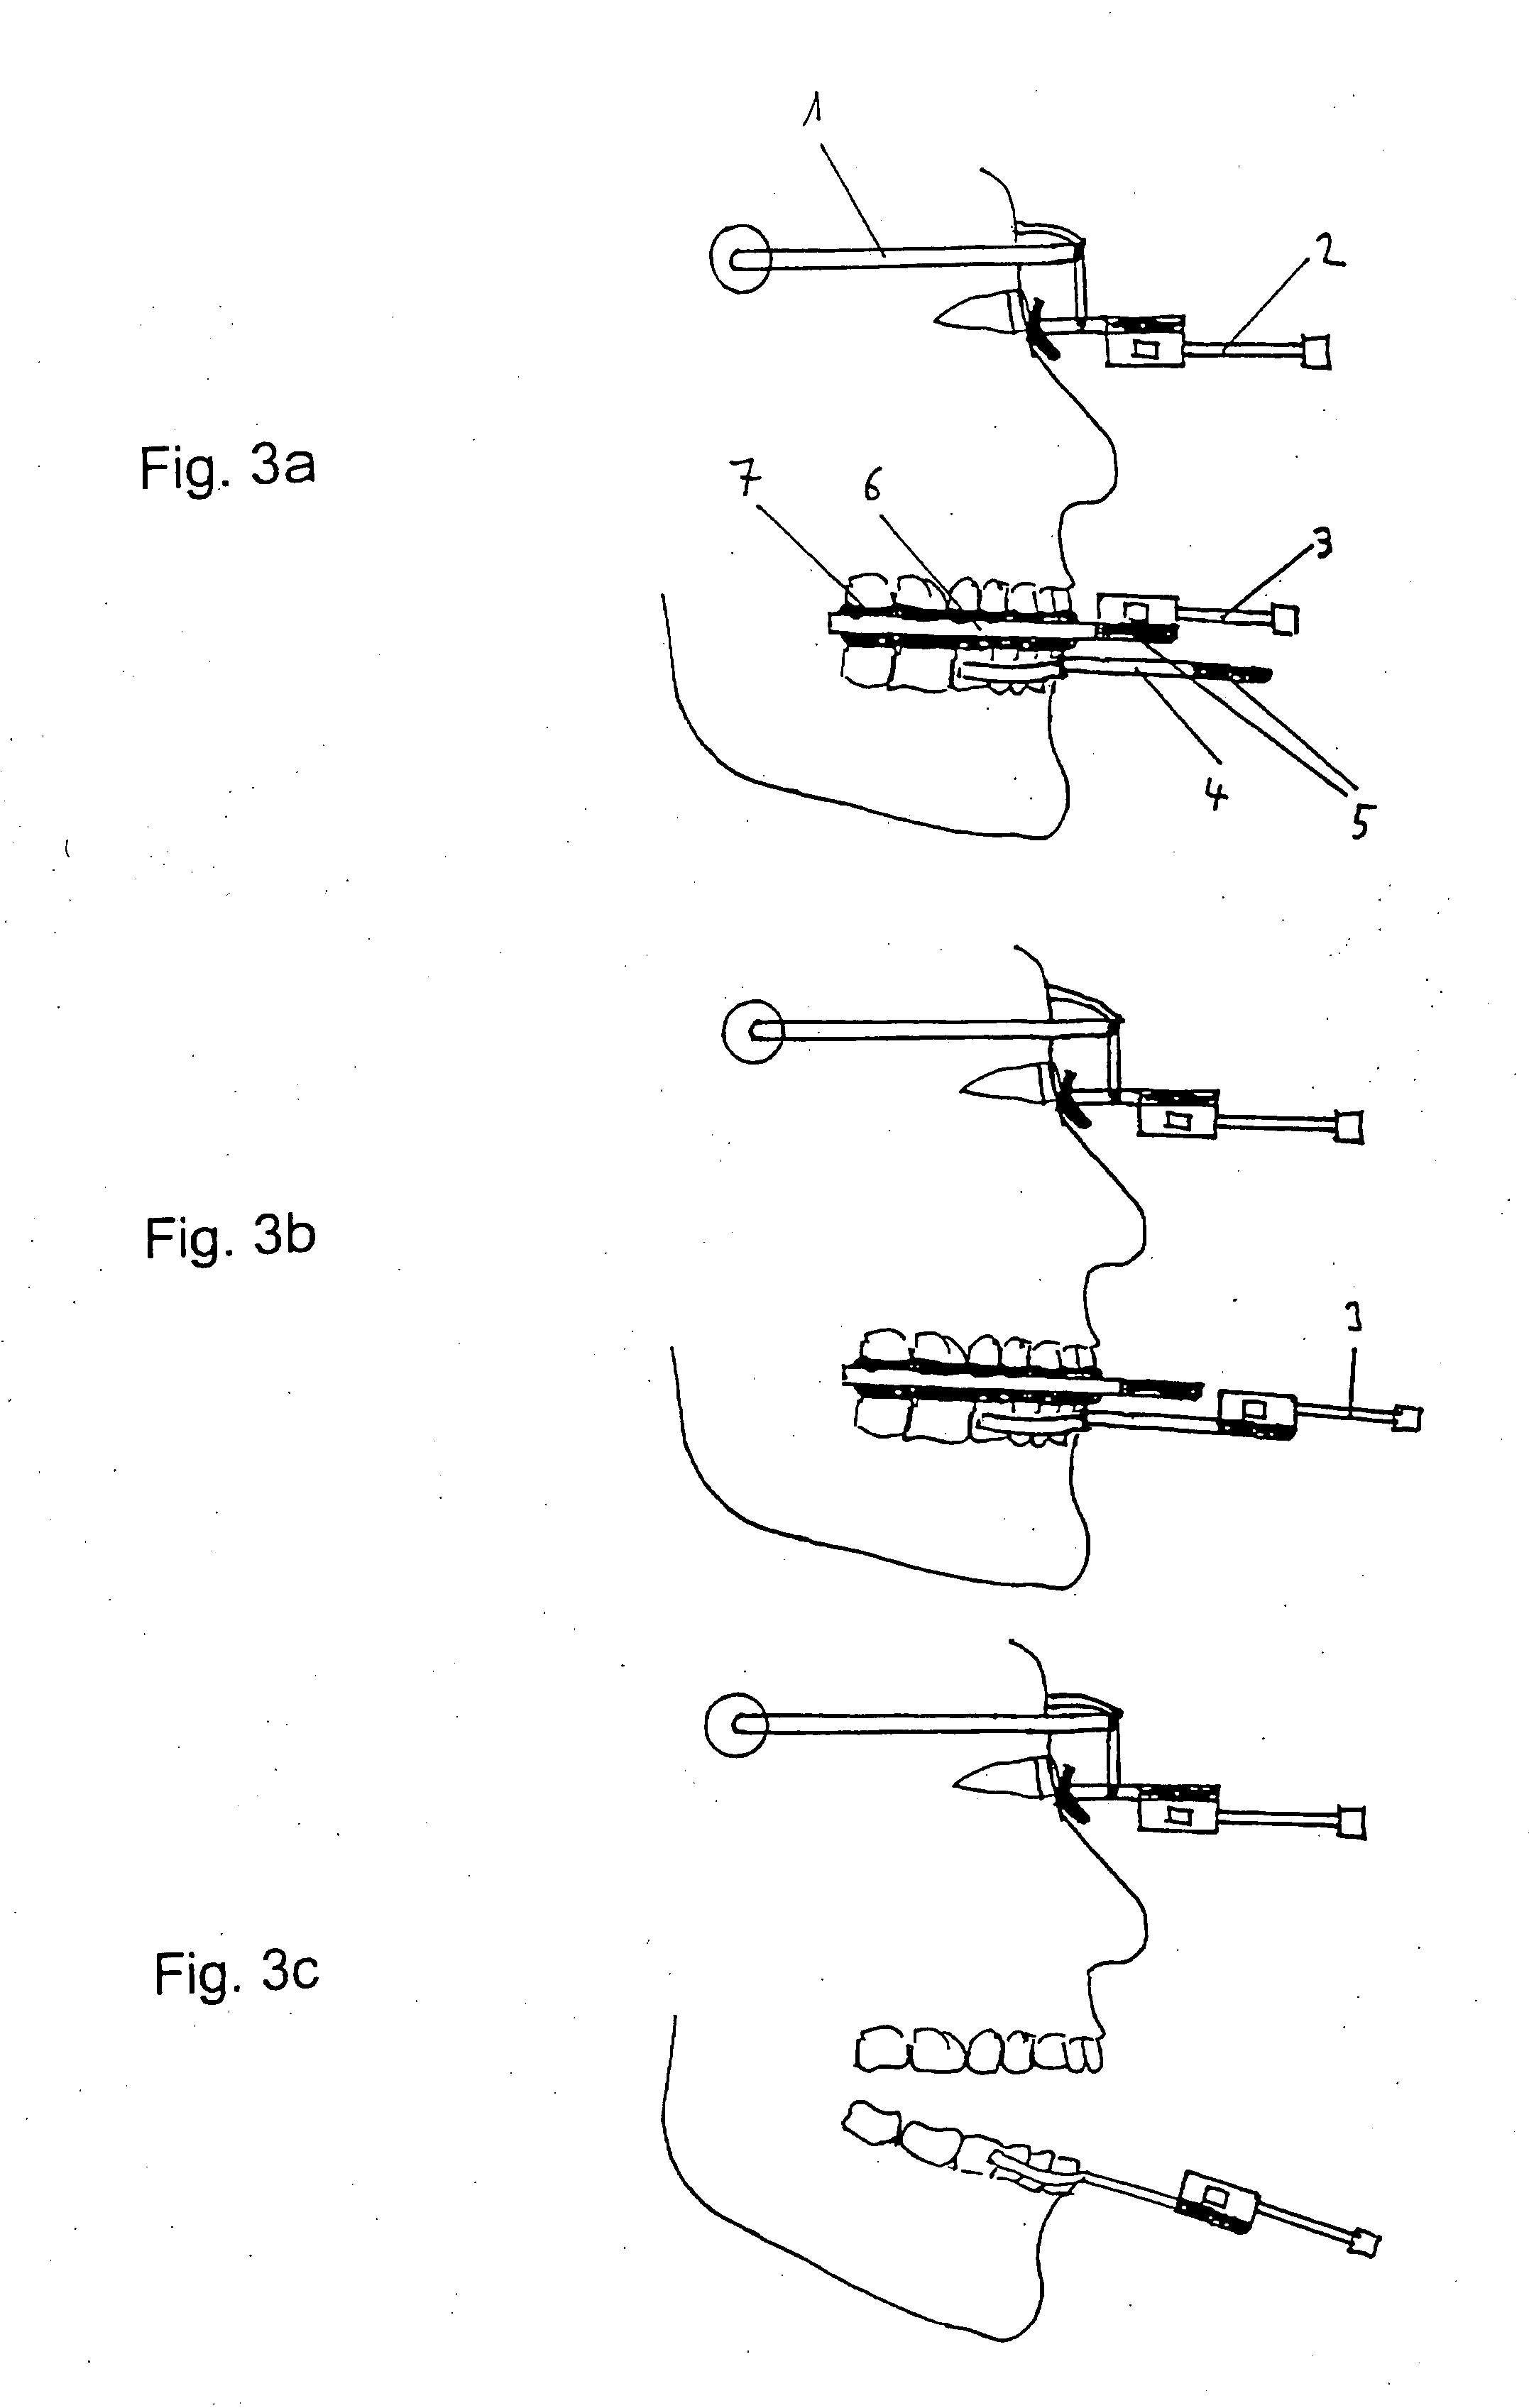 Method and apparatus for the 3-Dimensional analysis of movement of the tooth surfaces of the maxilla in relation to the mandible